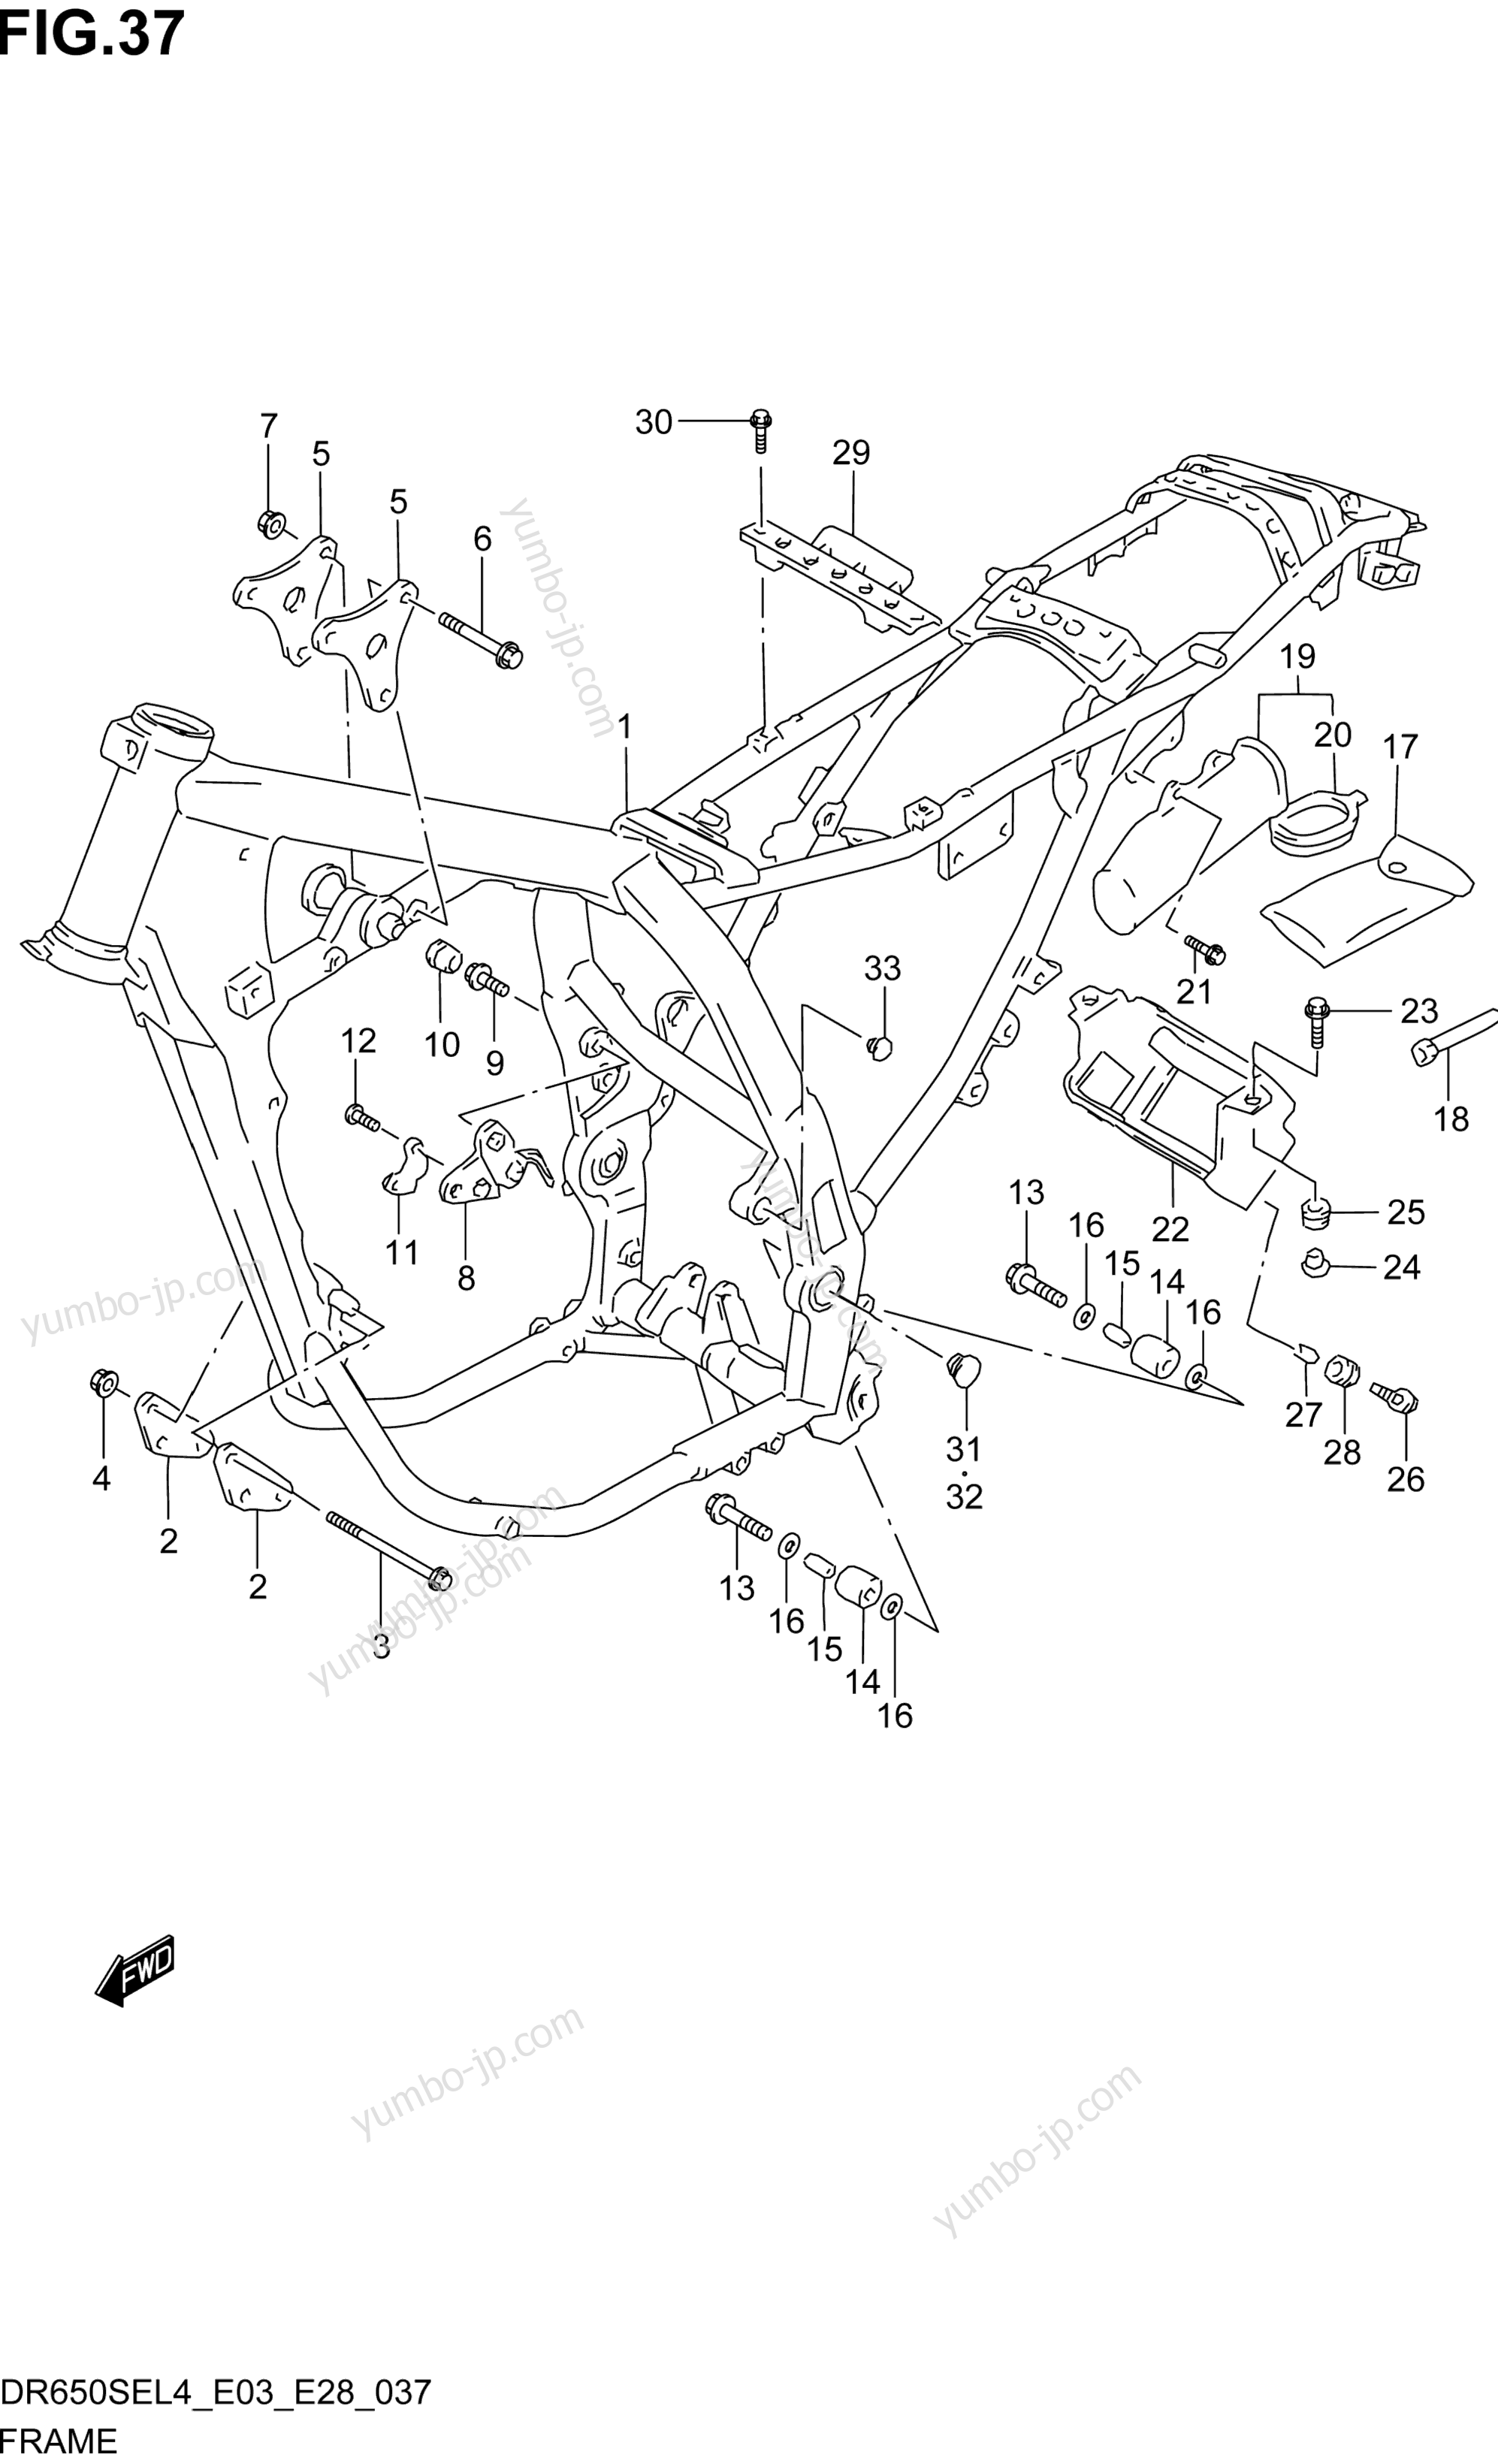 FRAME (DR650SEL4 E28) for motorcycles SUZUKI DR650SE 2014 year